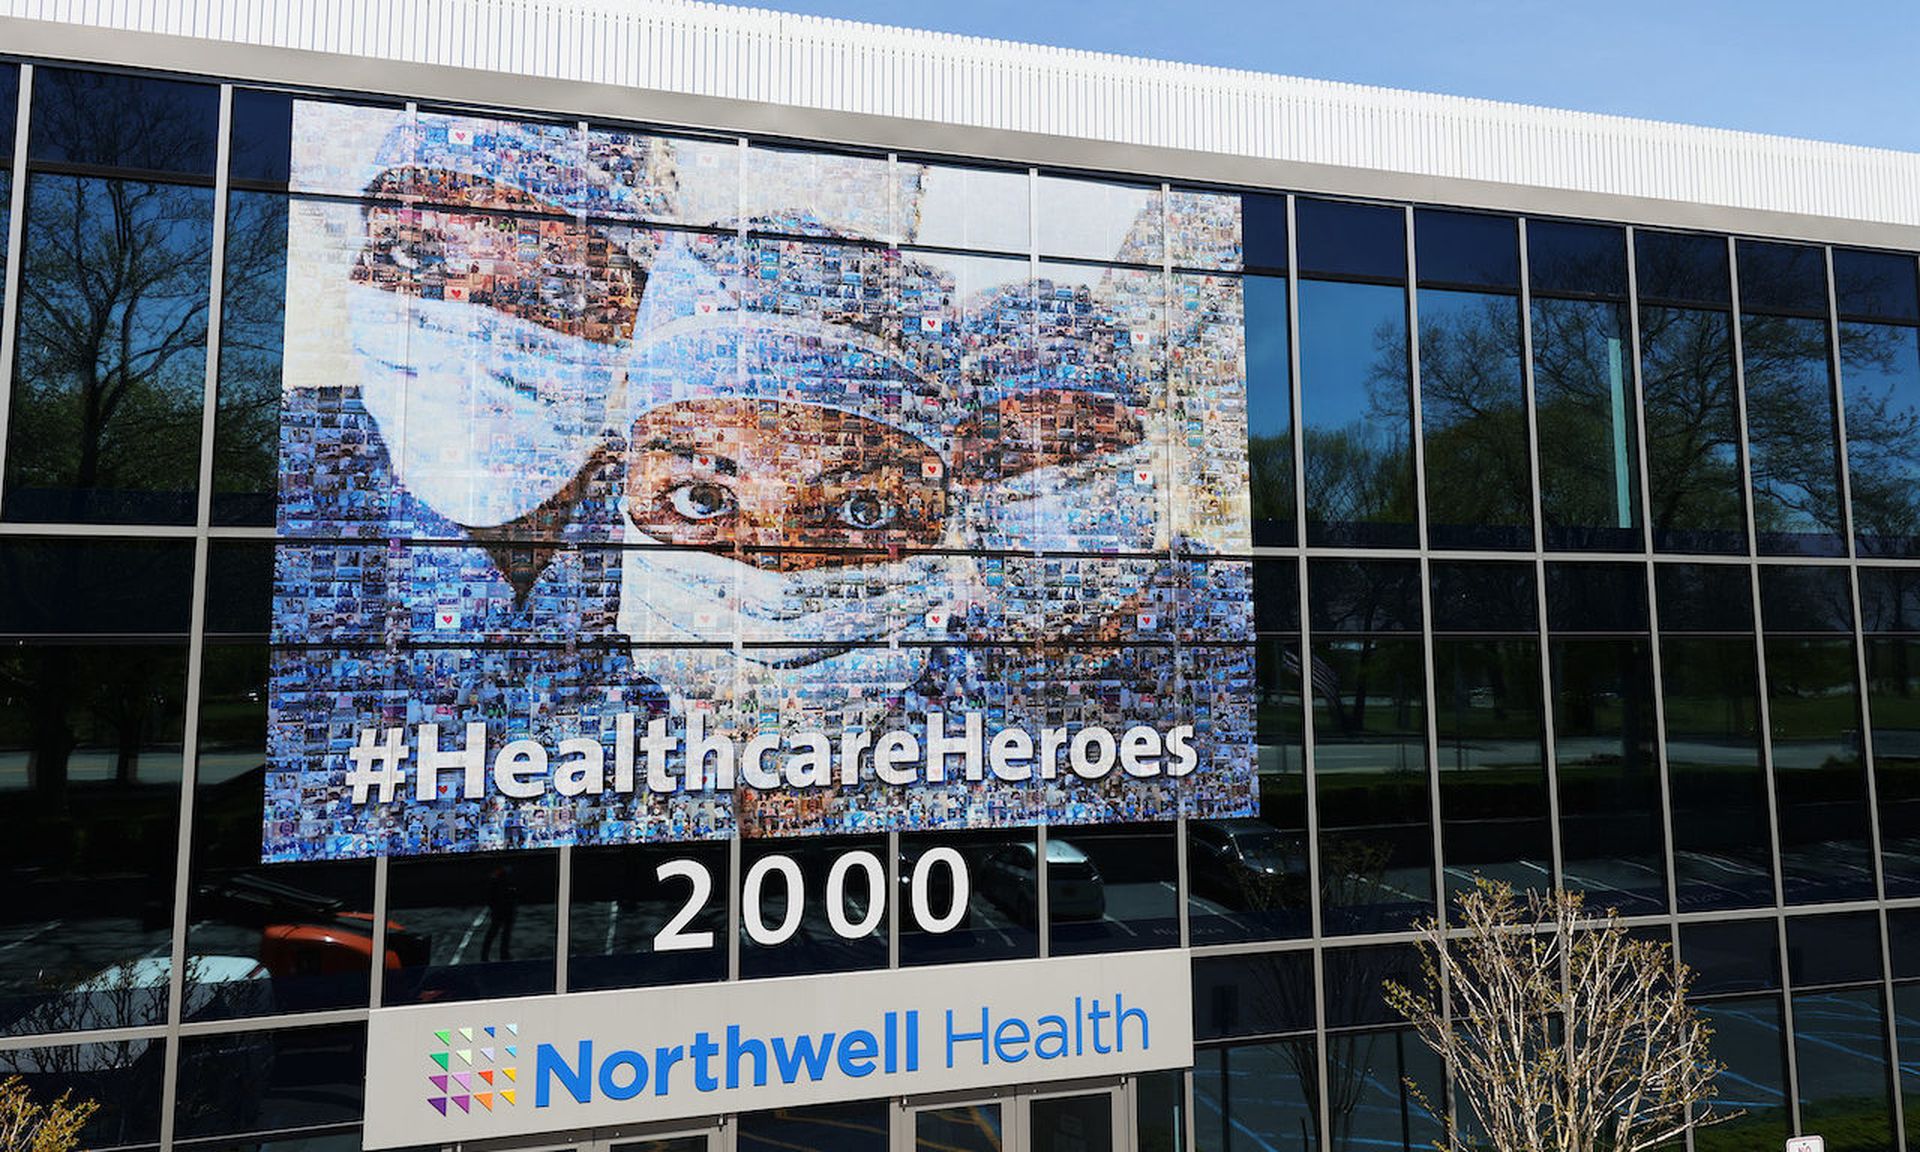 A mural on a Northwell Healthcare building features first responders and healthcare workers who are on the frontlines during the COVID-19 pandemic on May 05, 2020 in  New Hyde Park, New York.   (Photo by Al Bello/Getty Images)